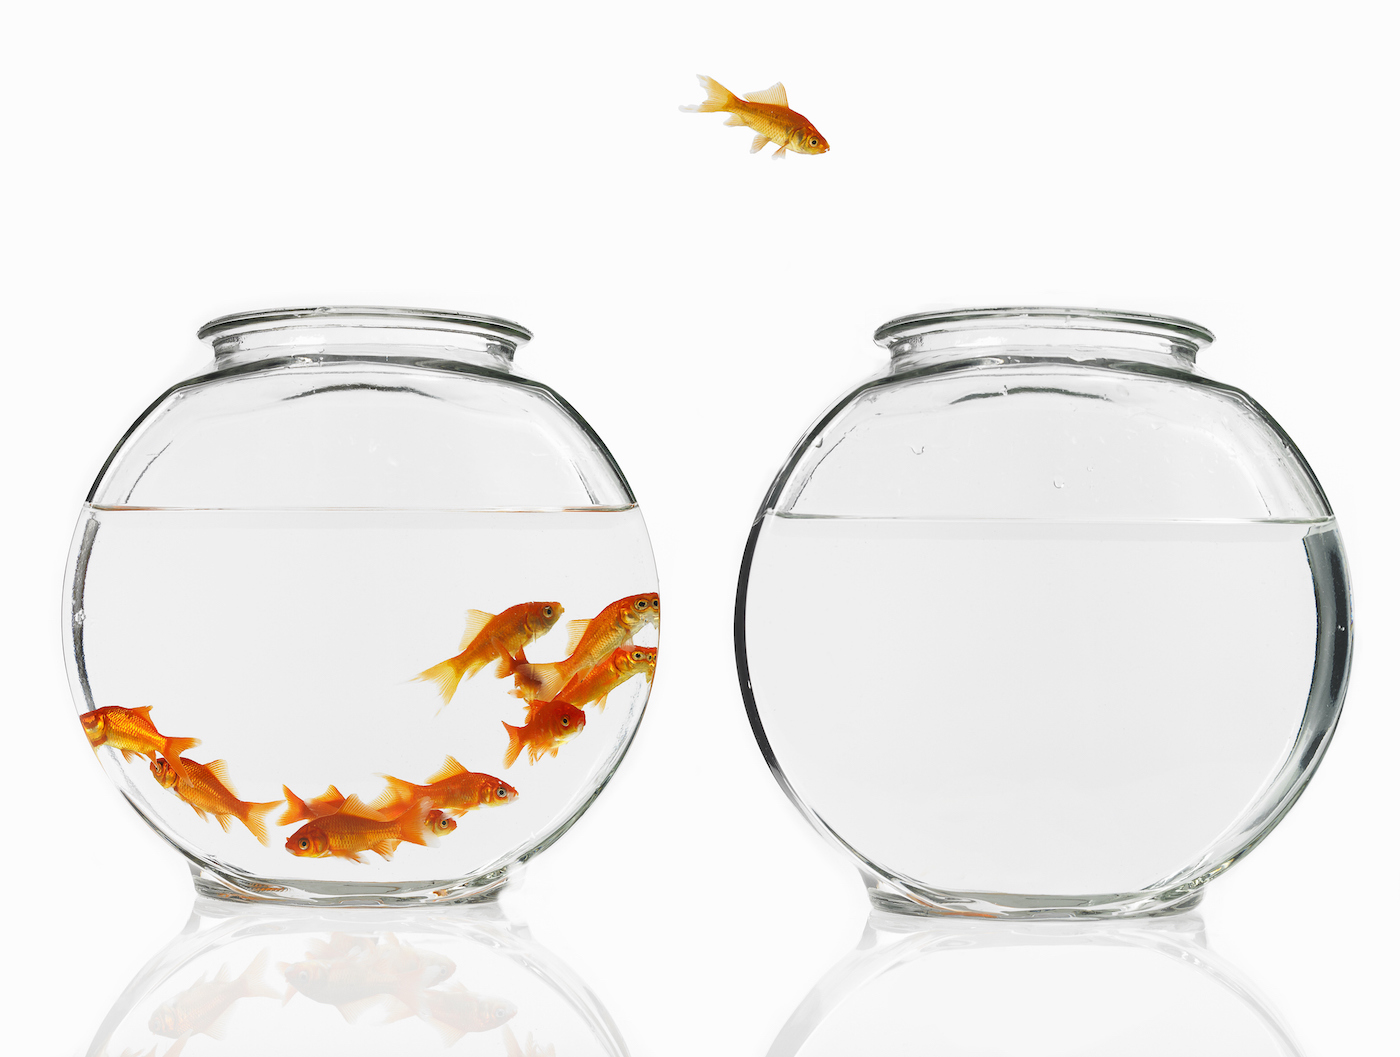 A goldfish jumps from a crowded bowl into an empty bowl.